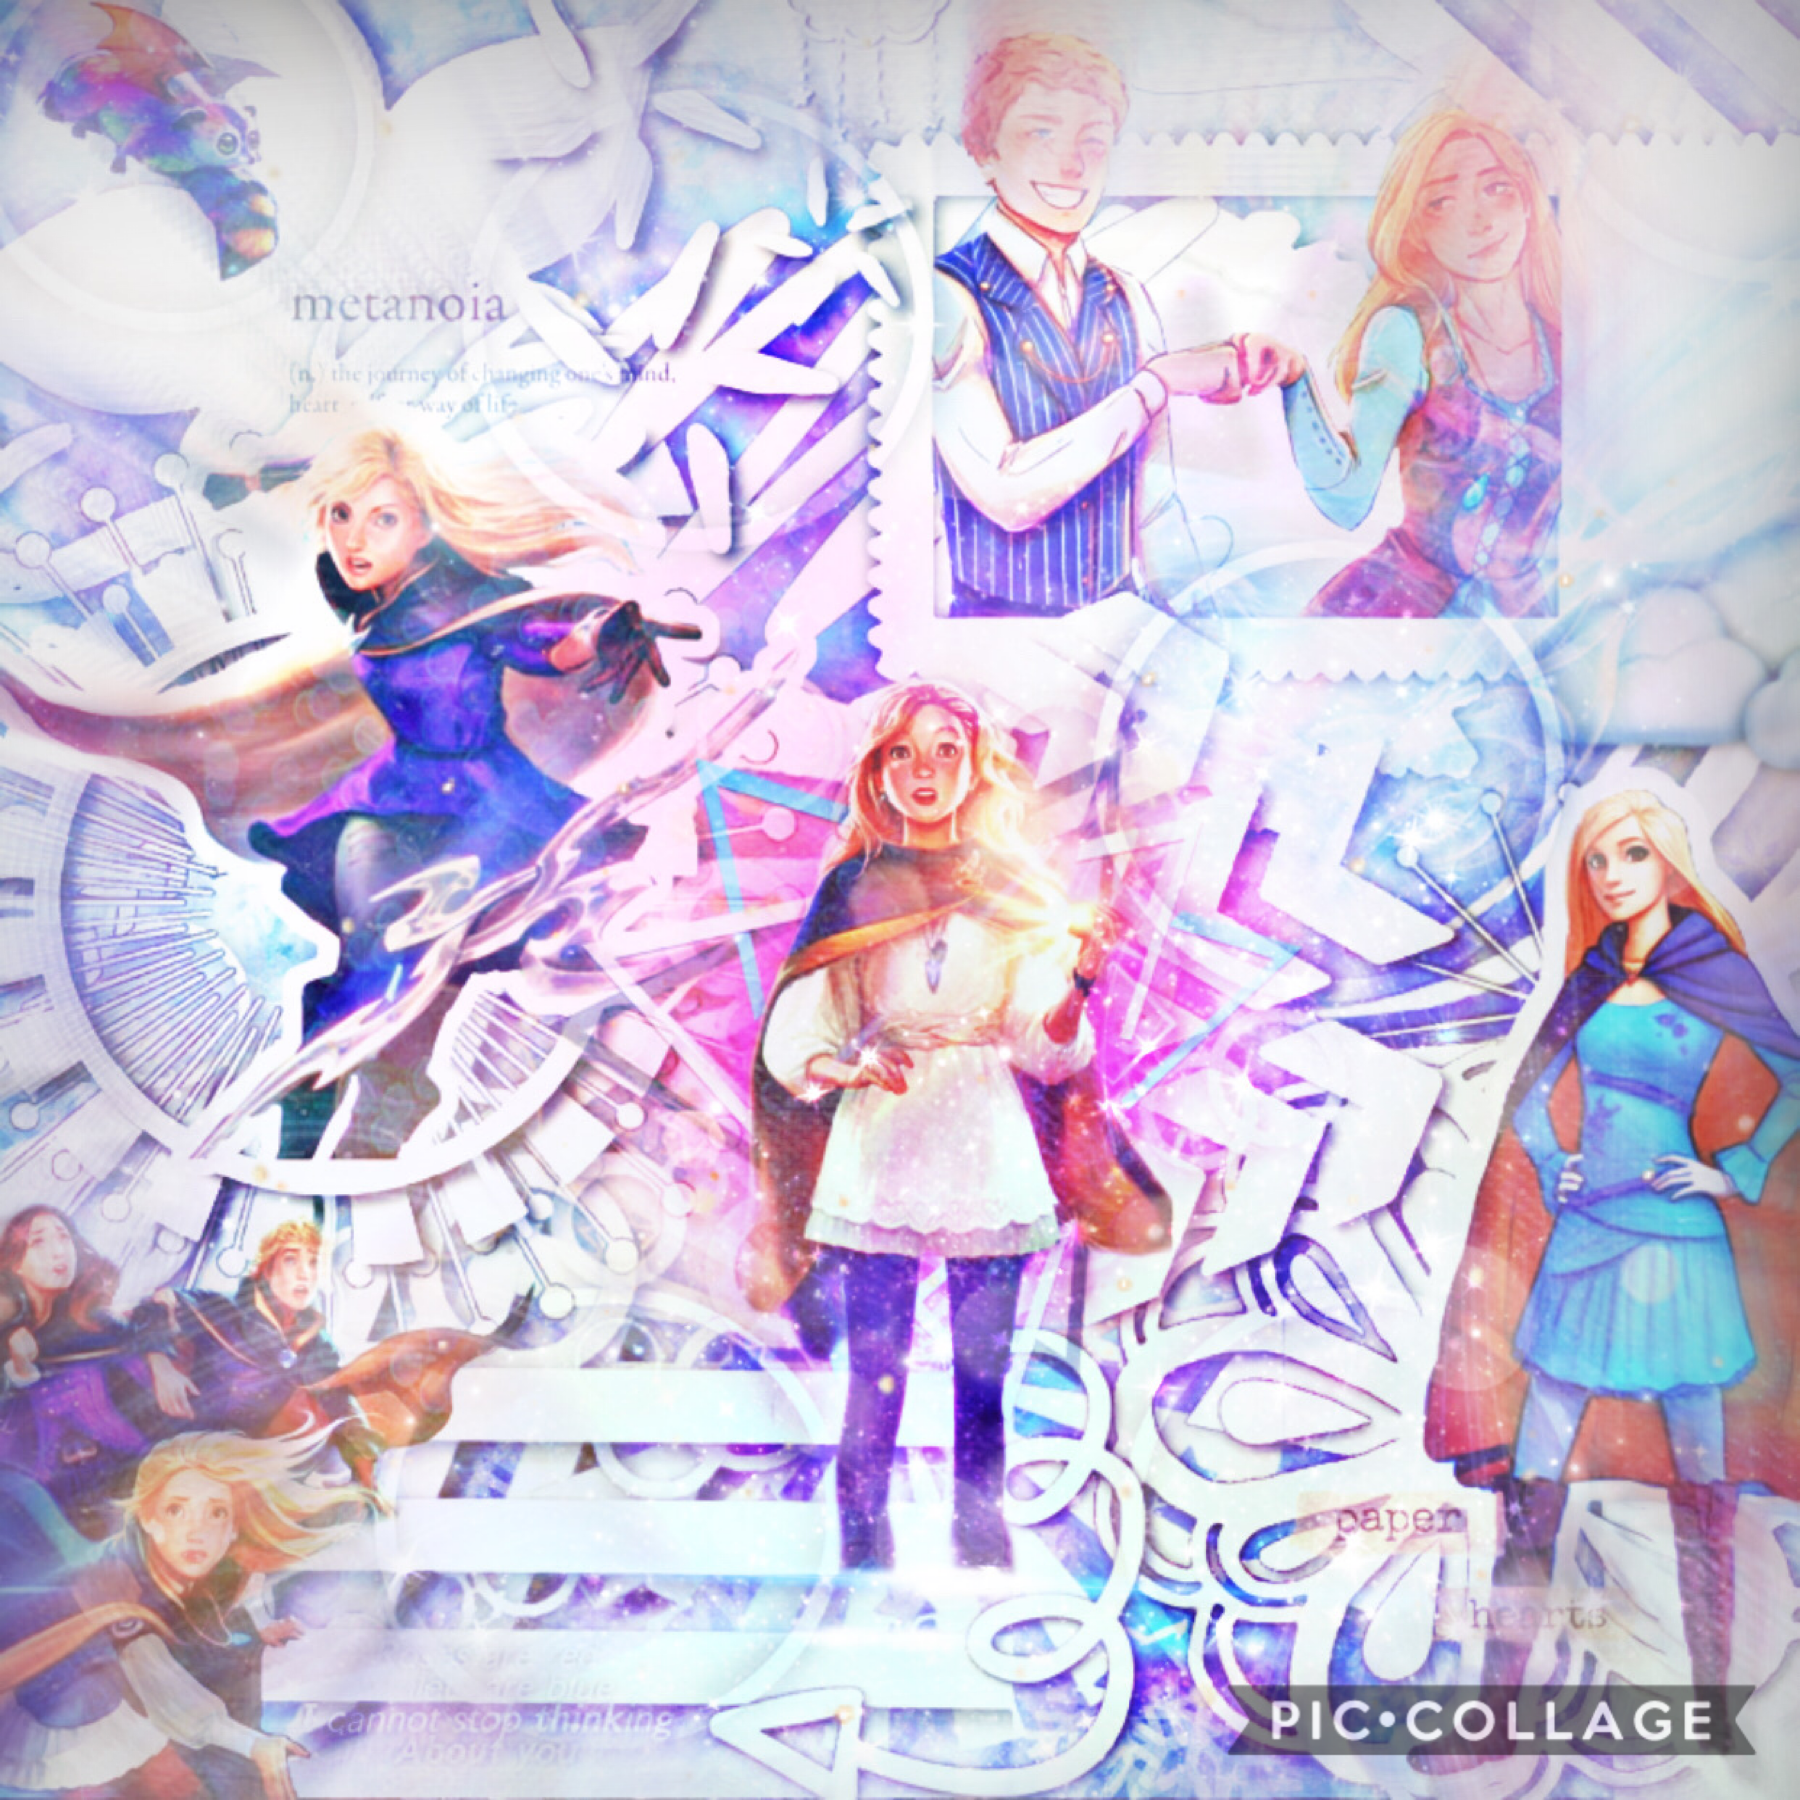 💜Made on PicsArt💜 First KOTLC edit! Finished KOTLC #1 and I don’t think I’ve finished a book that thick that fast. Anyway the votes for my new username are all tied up...so I might have to decide myself 😅😐